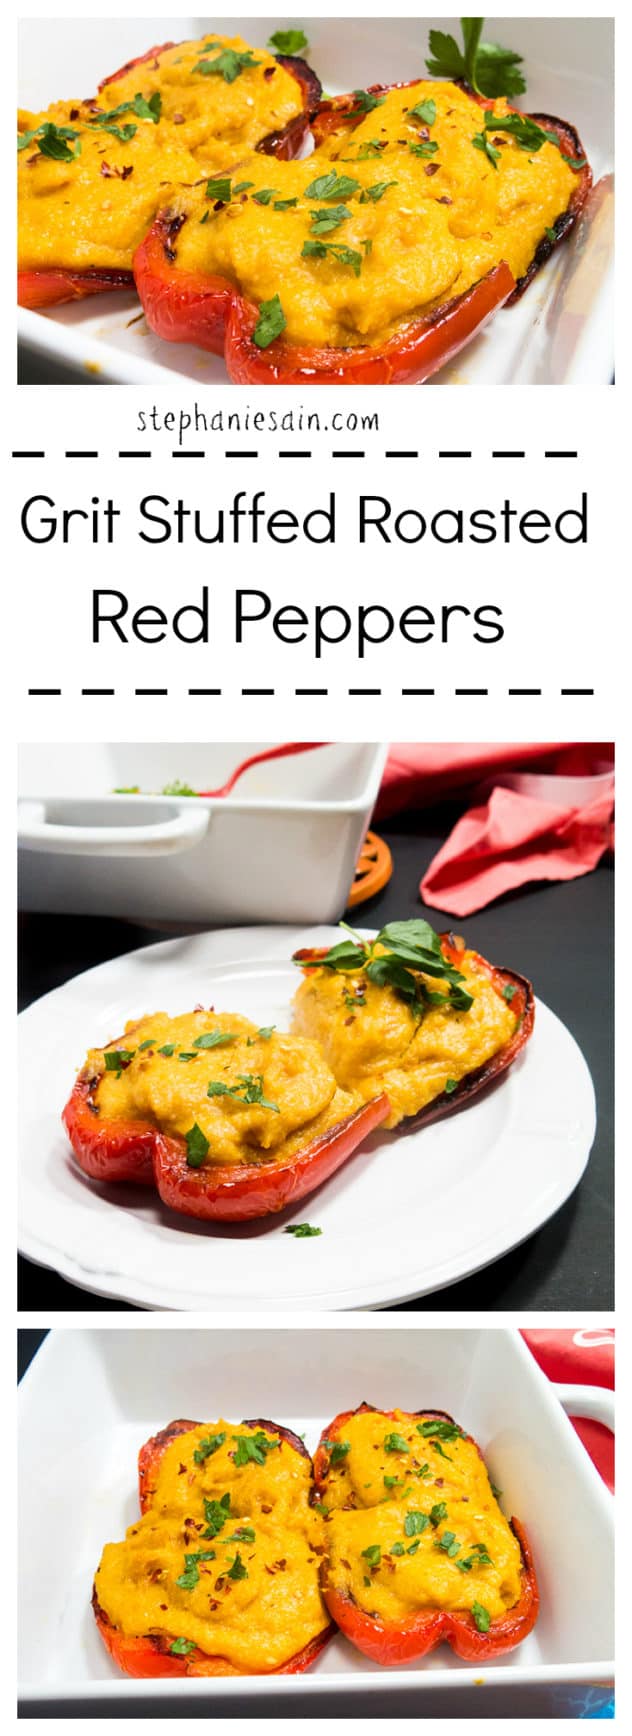 Grit Stuffed Roasted Red Peppers are a great brunch or dinner idea. Peppers roasted and then stuffed with creamy grits. Vegetarian and Gluten Free.